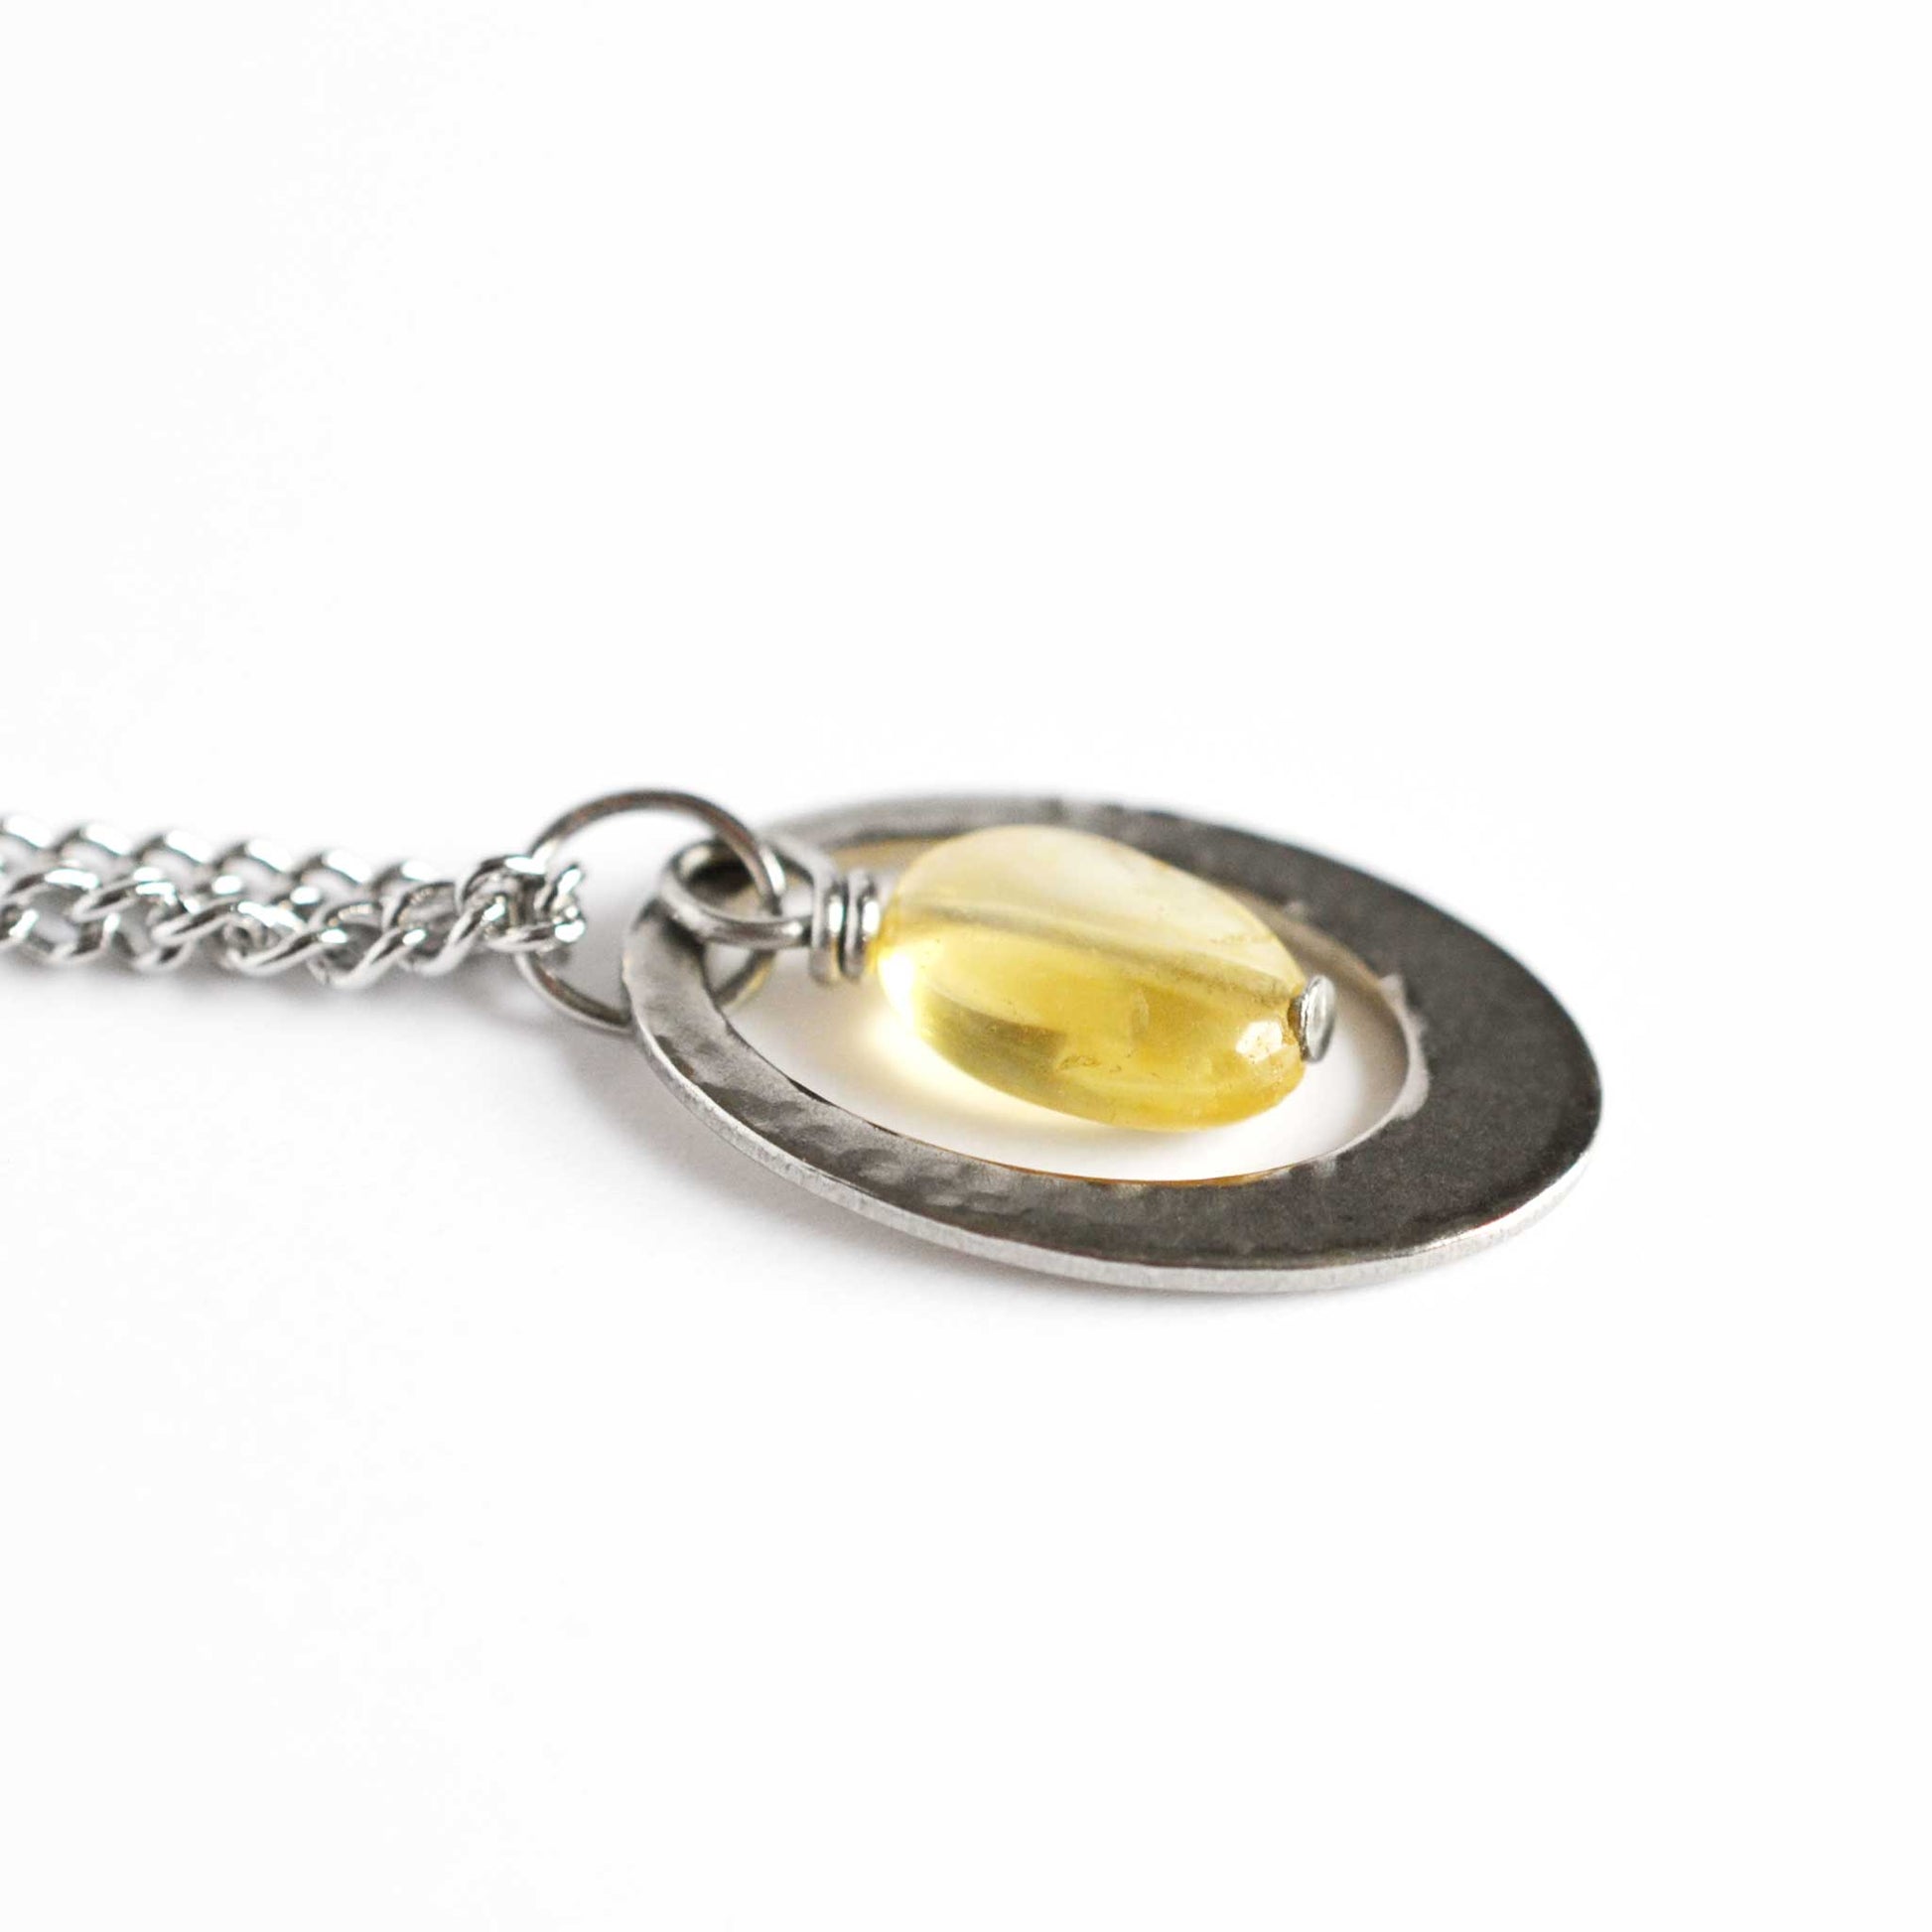 Close up of yellow Citrine gemstone and stainless steel oval pendant necklace.